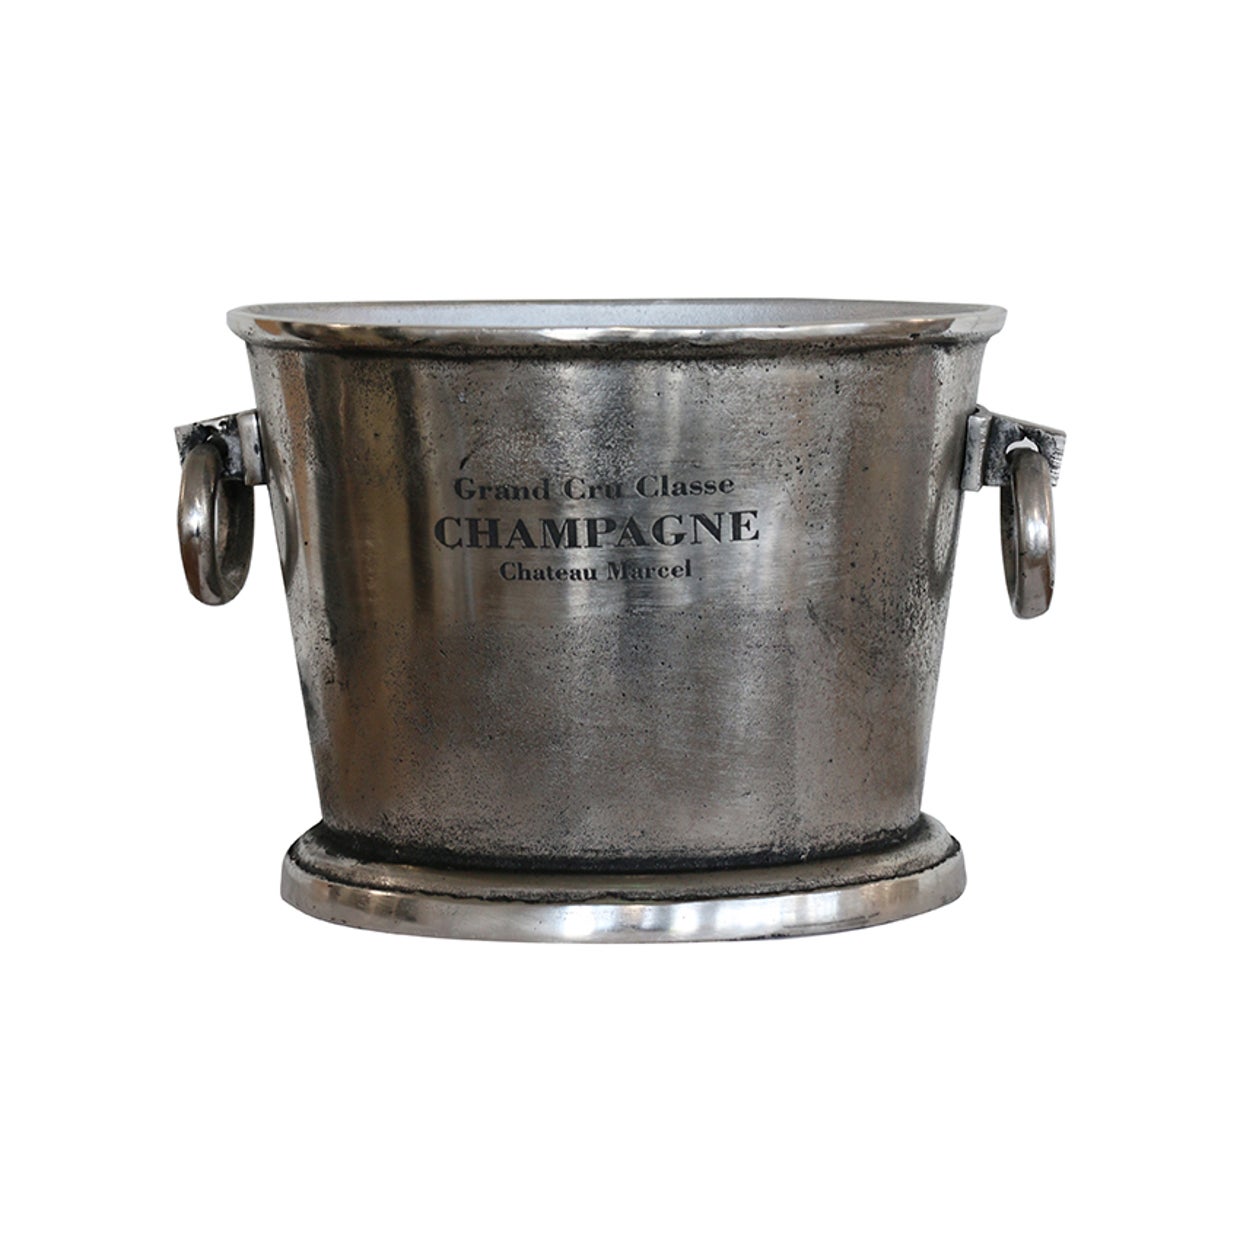 CAIRO ENGRAVED OVAL CHAMPAGNE BUCKET